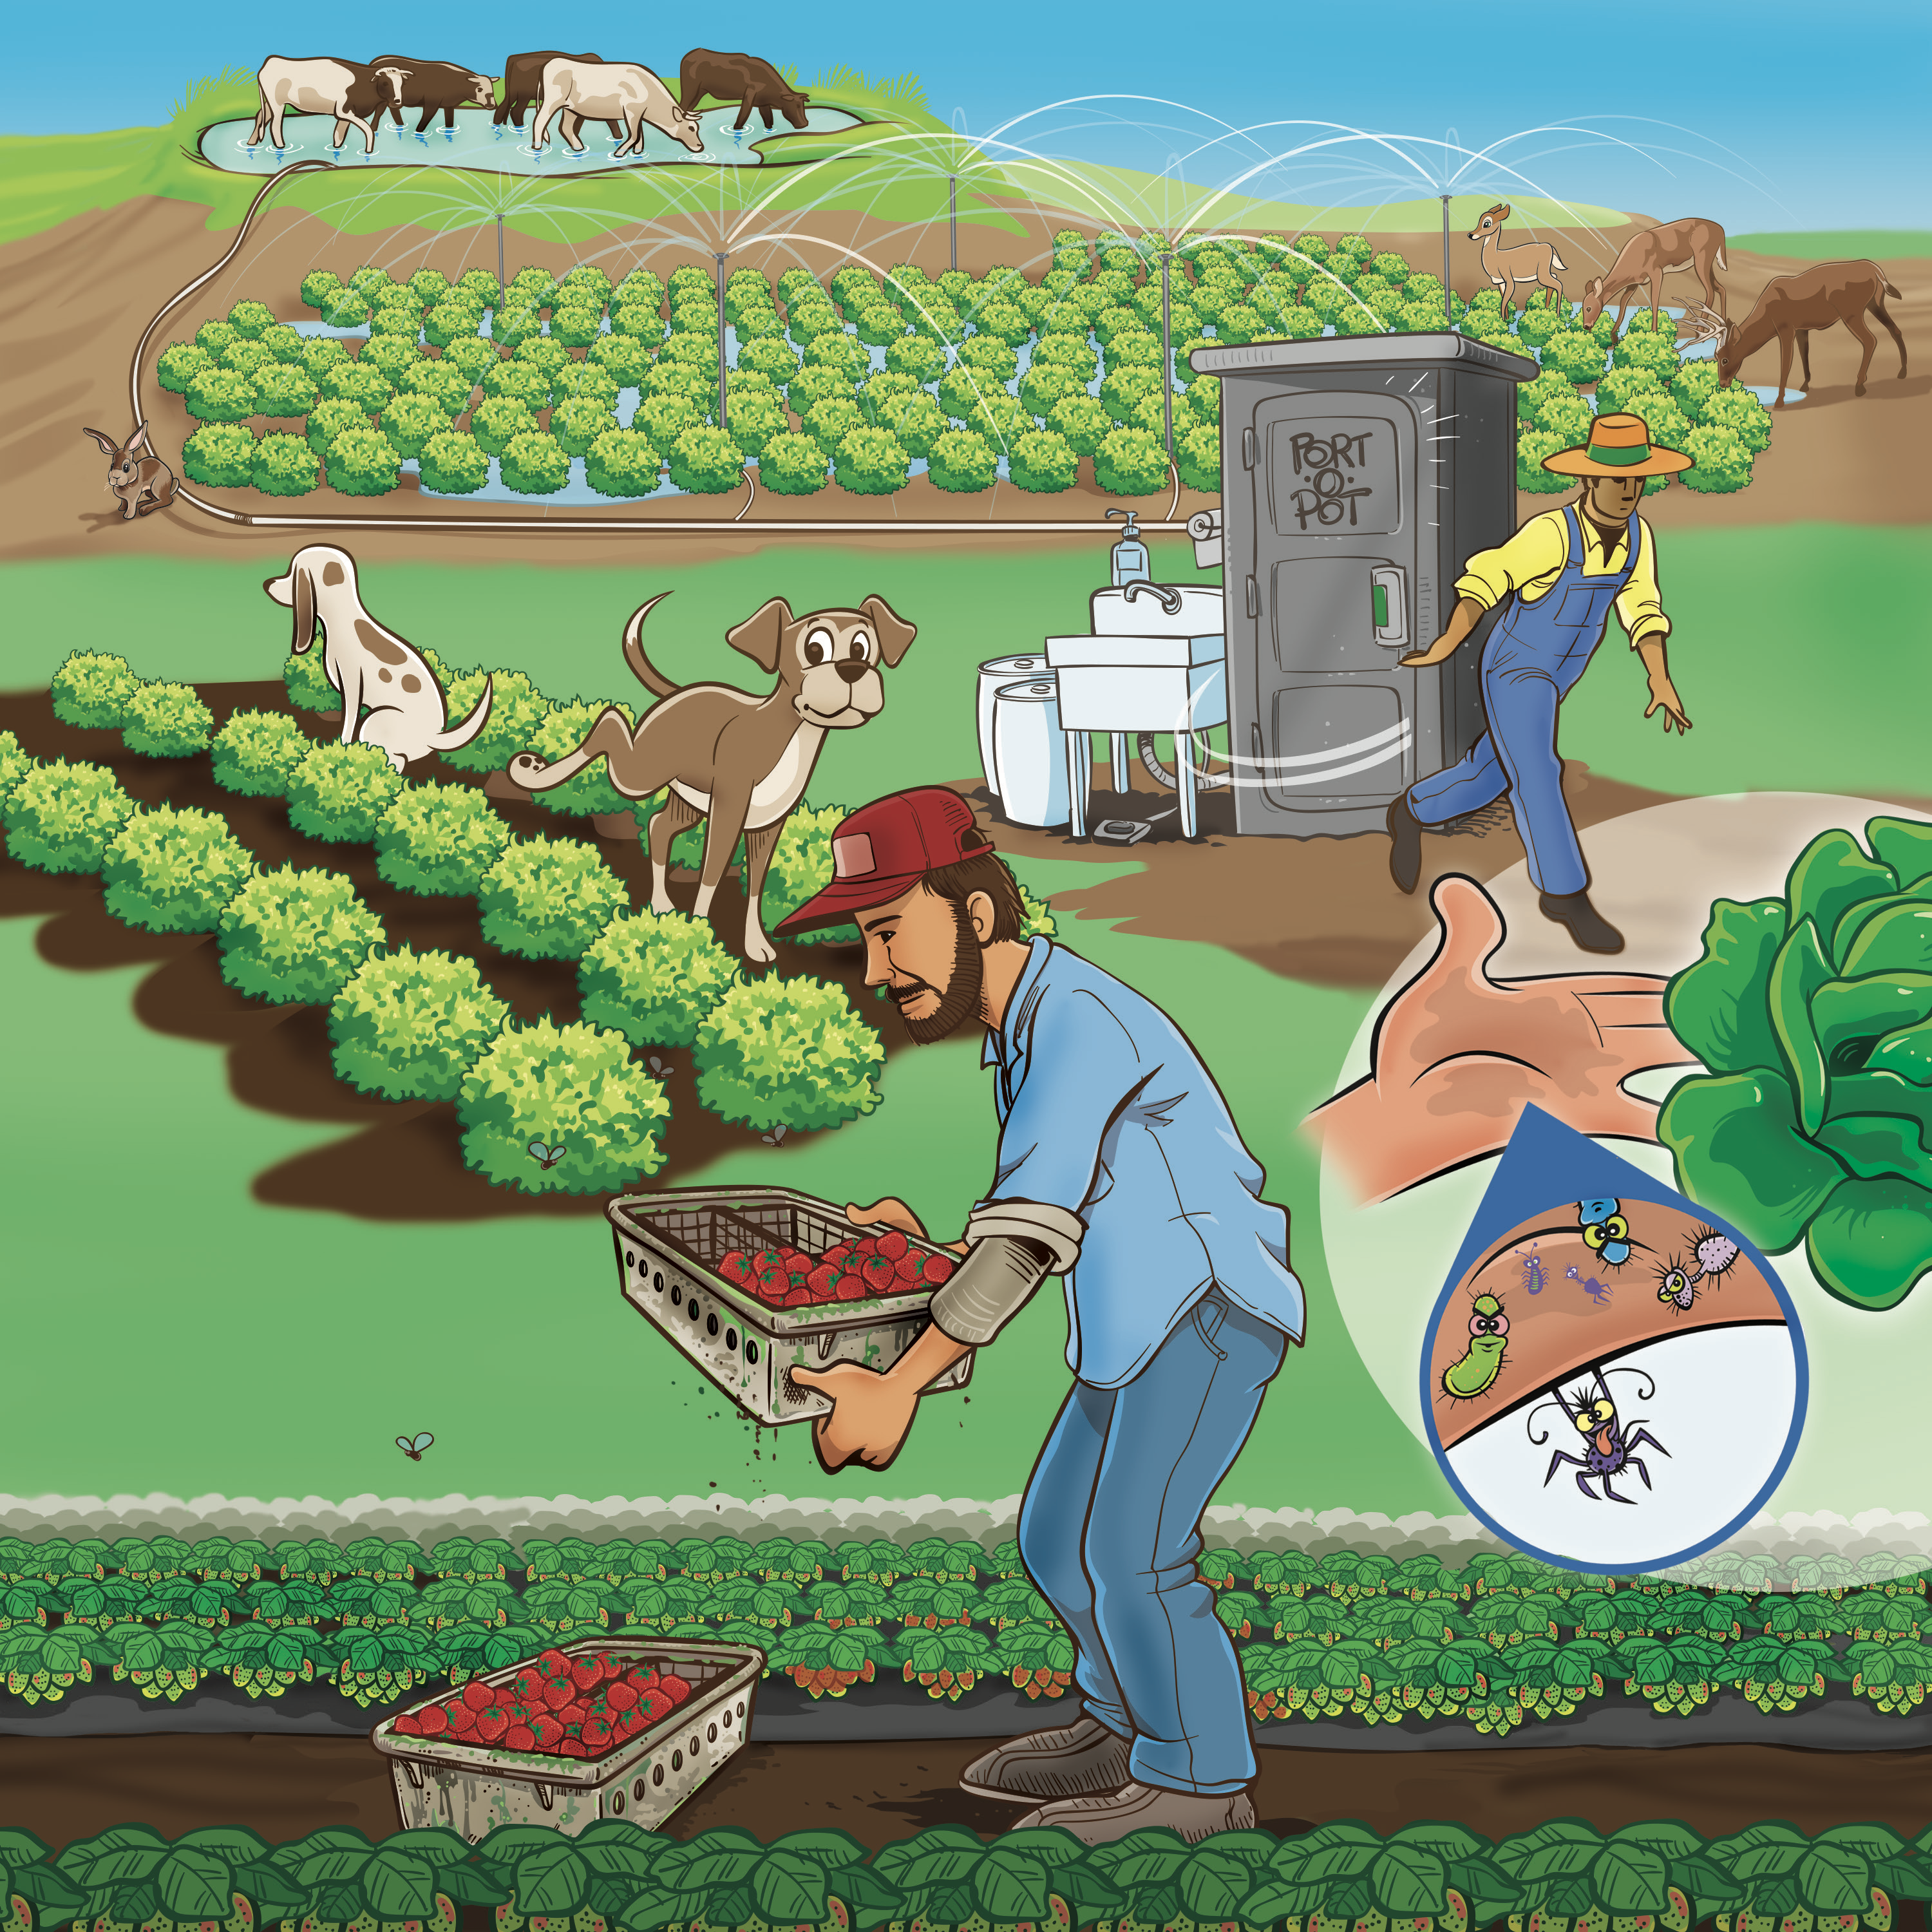 Illustration of sources of farm contamination including livestock, crops, wild animals, toilets, pets, and people handling crops